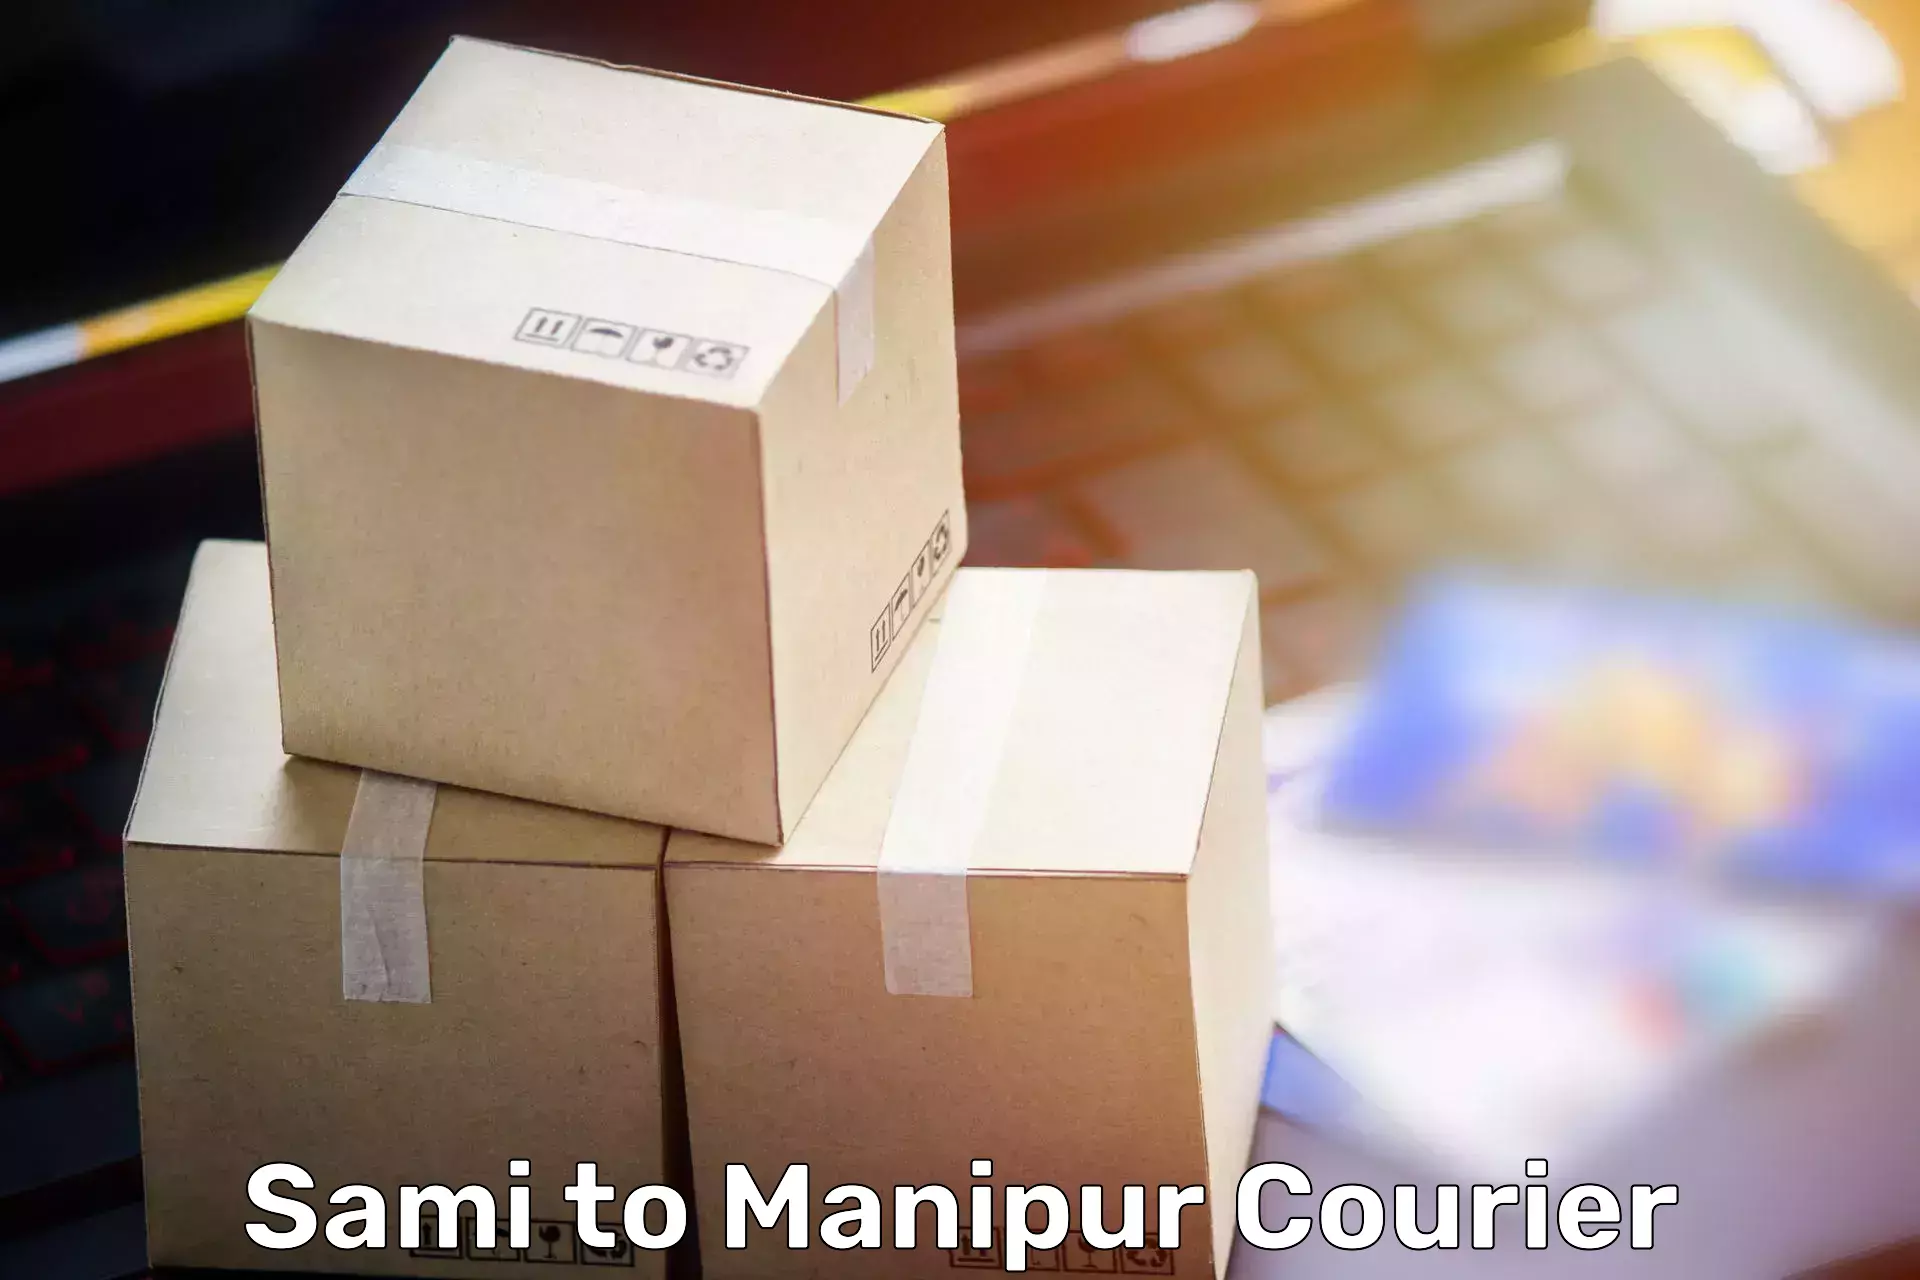 Quality moving company Sami to Manipur